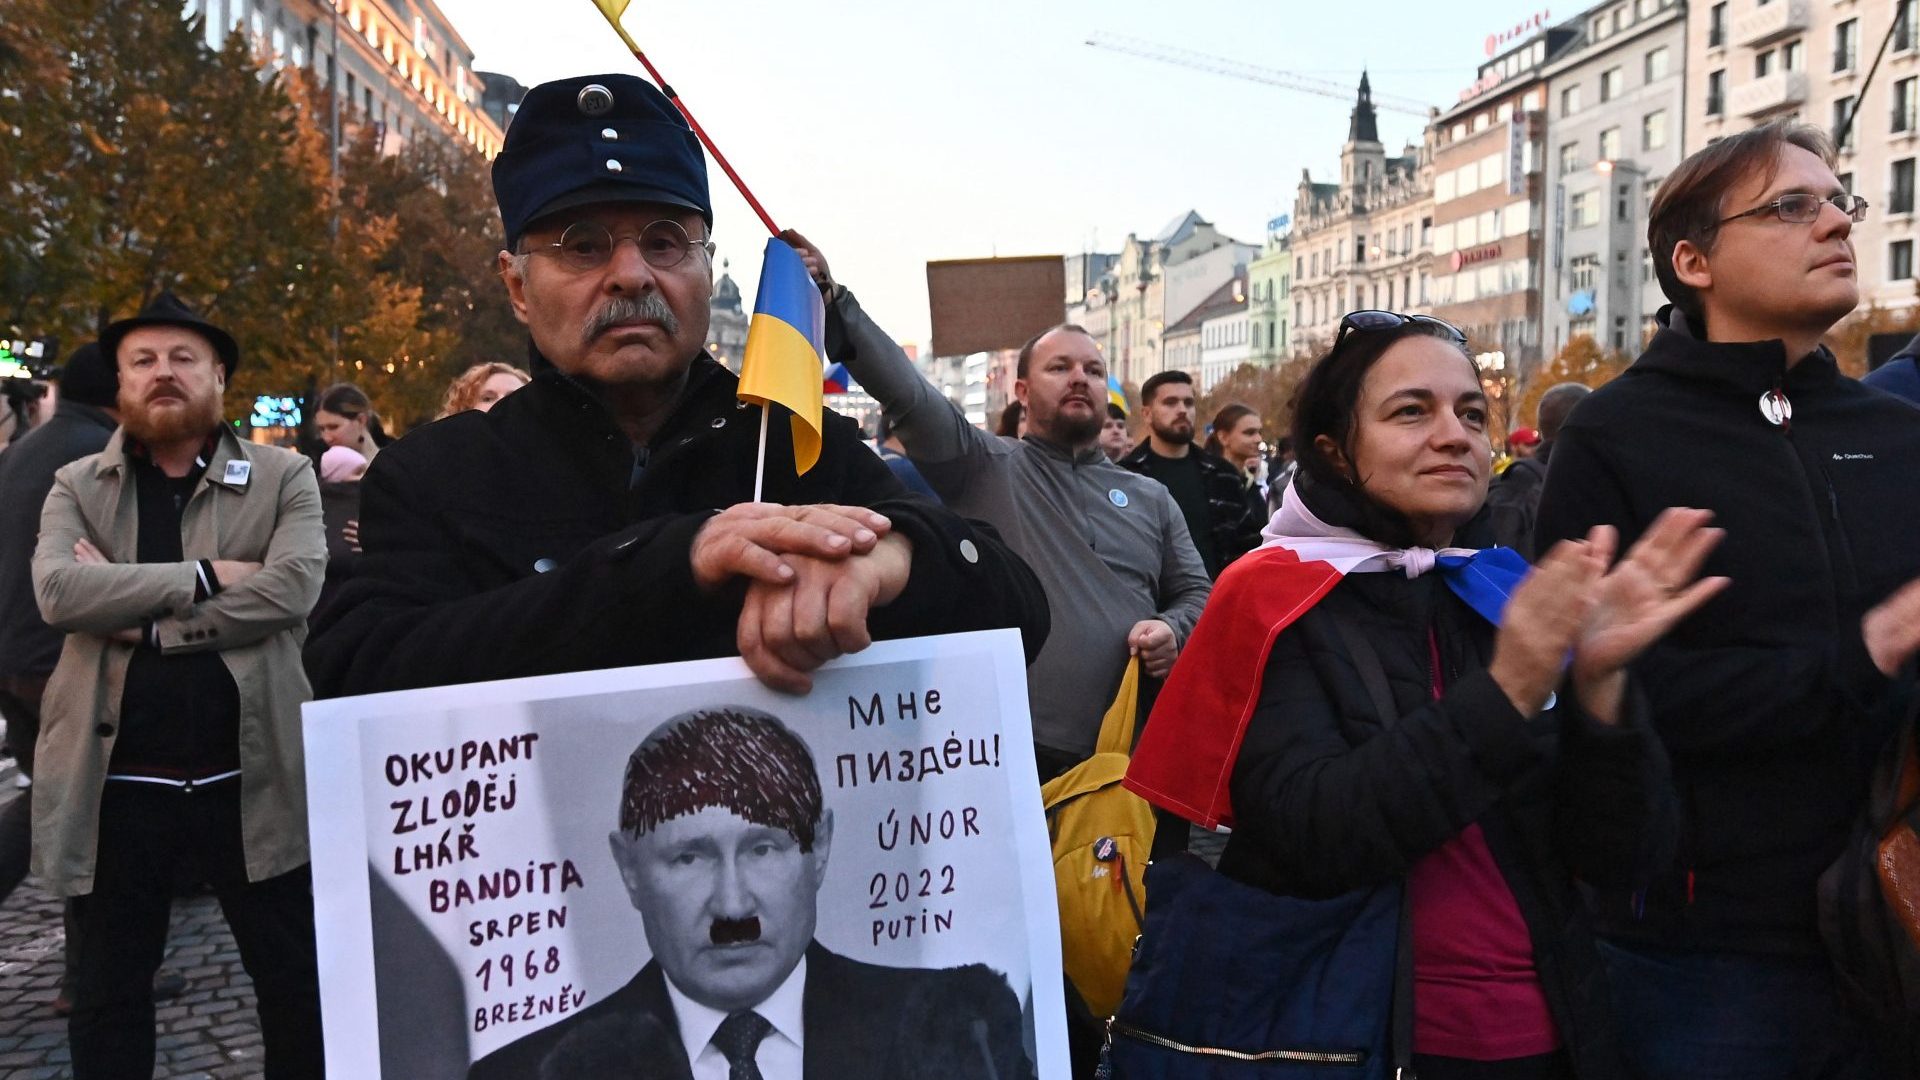 A man holds a placard reading "Occupier, thief, liar, bandit, 1968 Breznev, I'm done, 2022 Putin" with the face of Russian President Vladimir Putin during an anti-war protest at the Venceslas Square in Prague, on October 30, 2022. Photo: MICHAL CIZEK/AFP via Getty Images